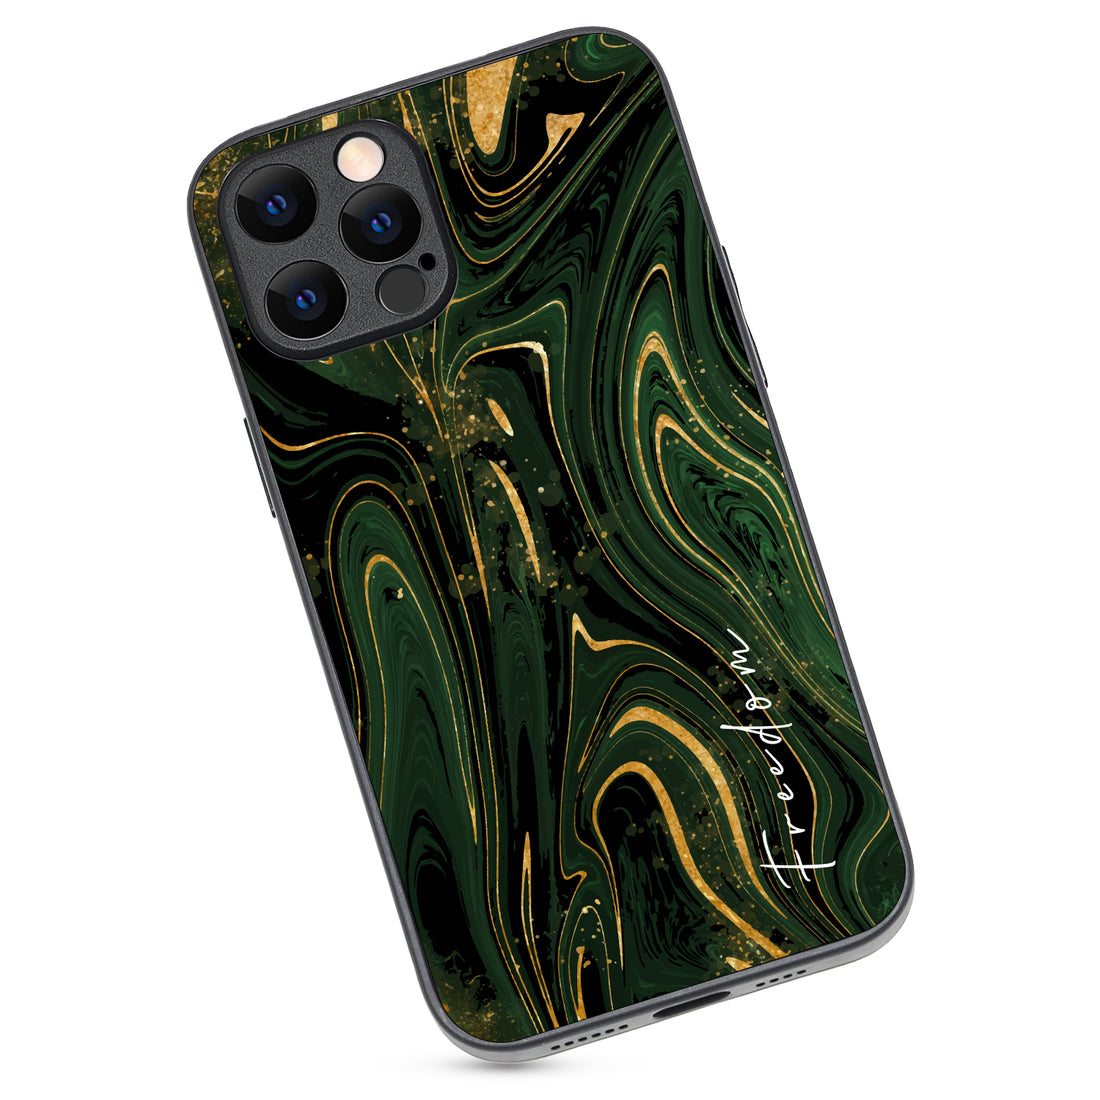 Freedom Marble iPhone 12 Pro Max Case